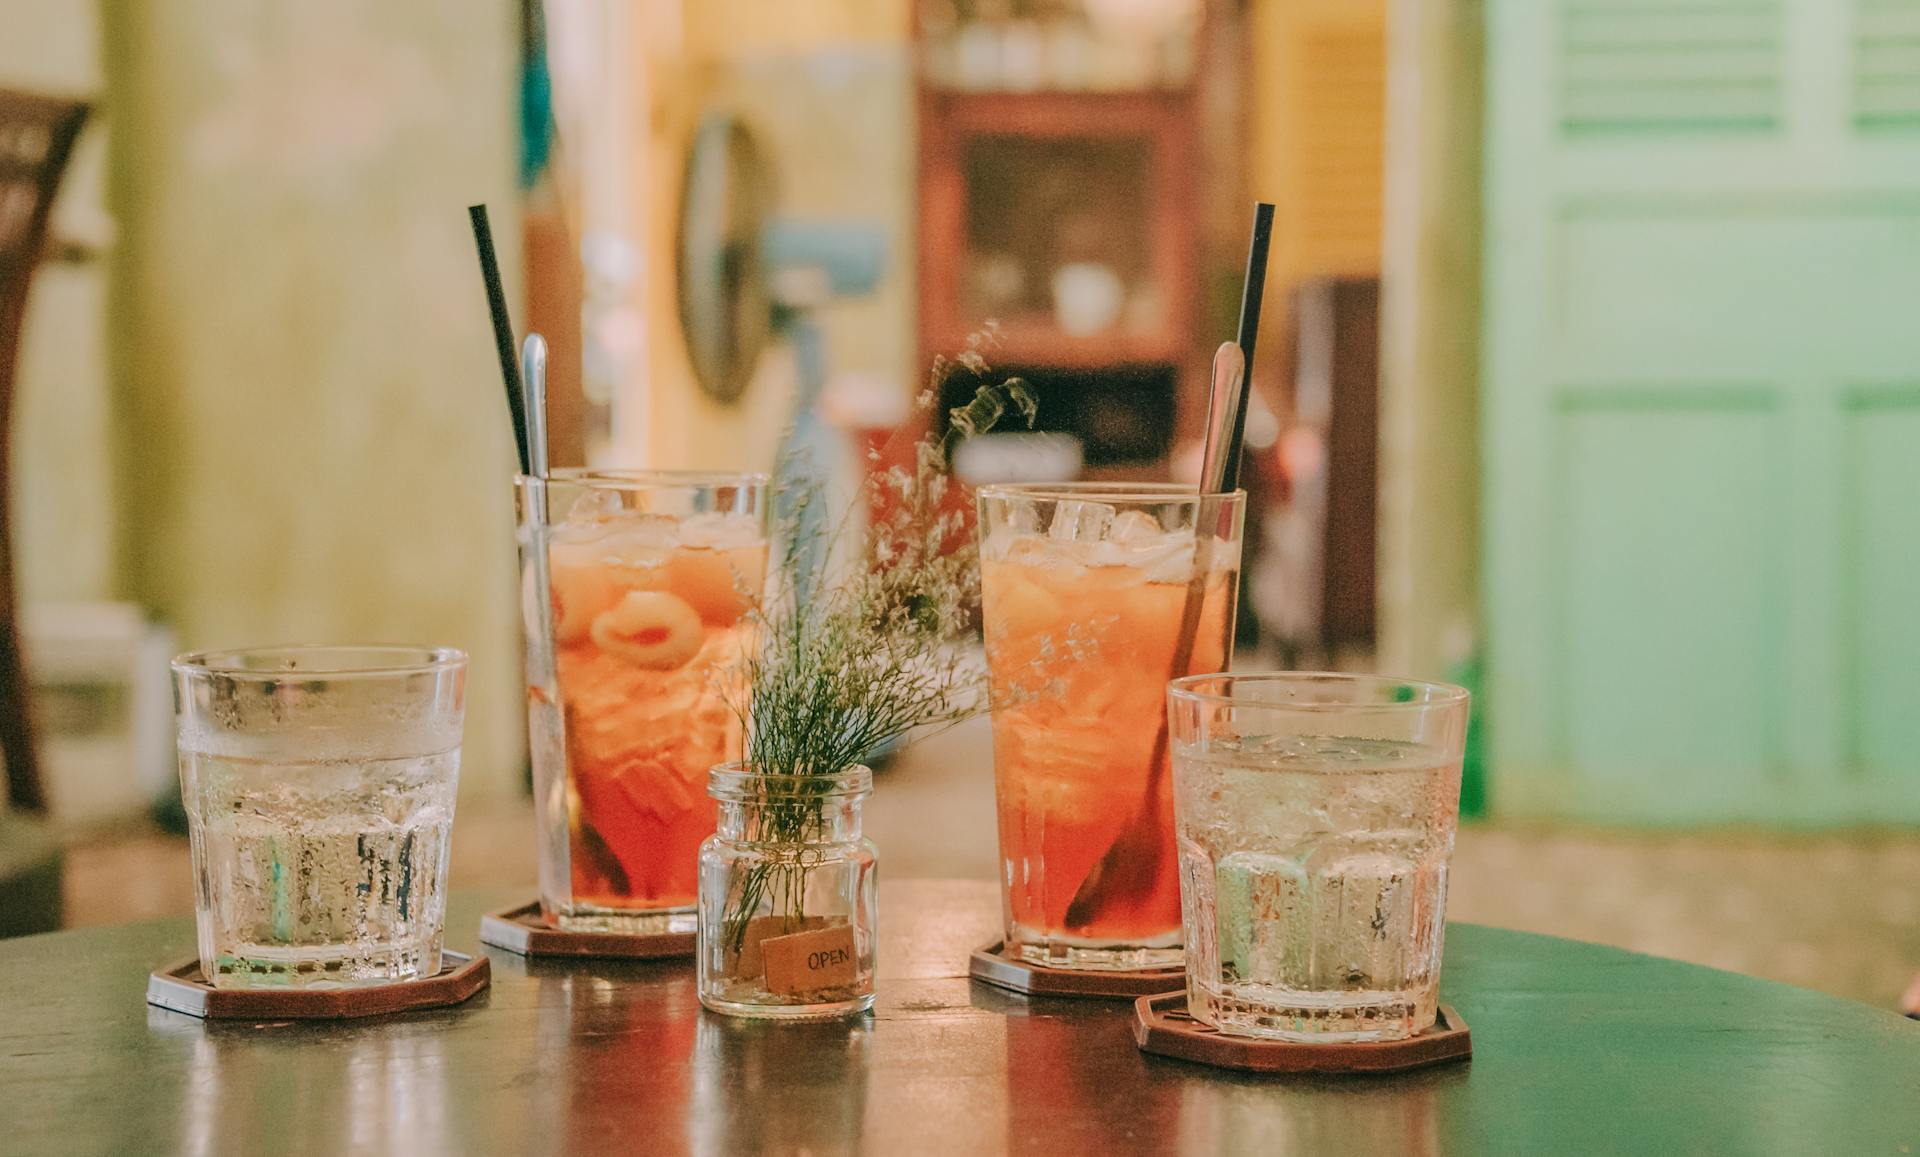 Drinks on a table | Source: Pexels